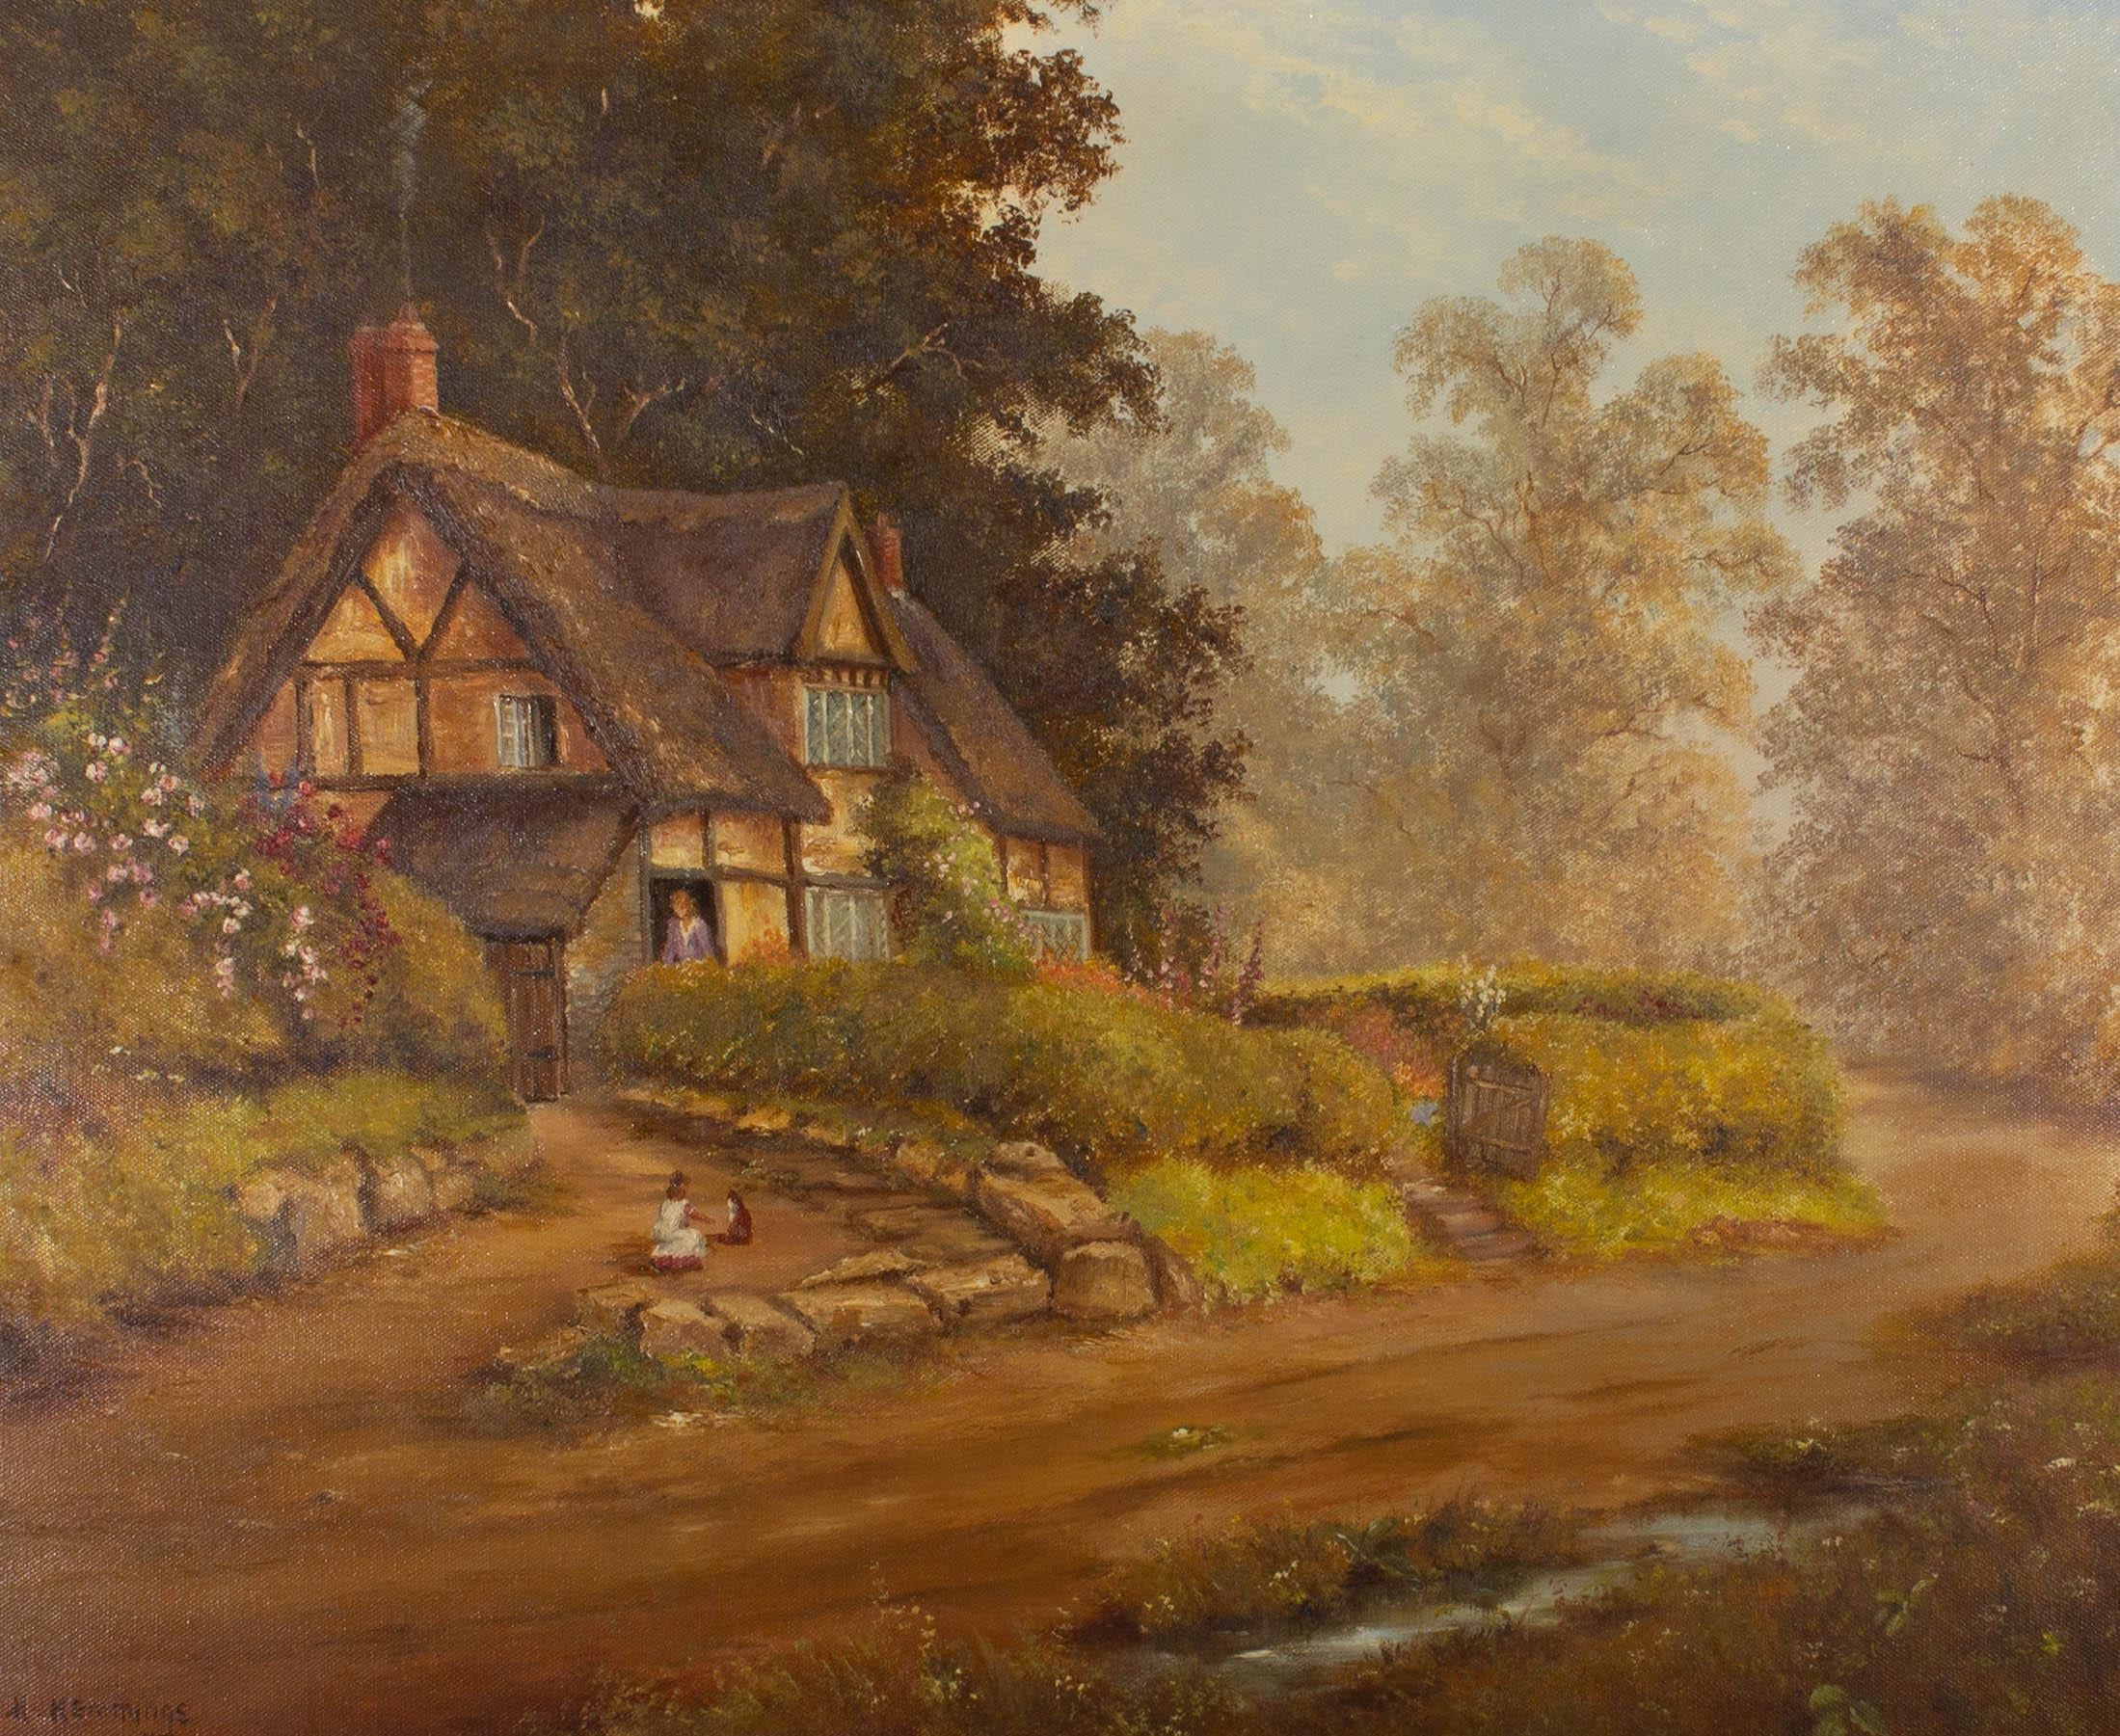 A delightful scene depicting a thatched cottage on a country lane with a beautiful garden. Signed to the lower left. Well presented in a decorative gilt frame. On canvas on stretchers.

